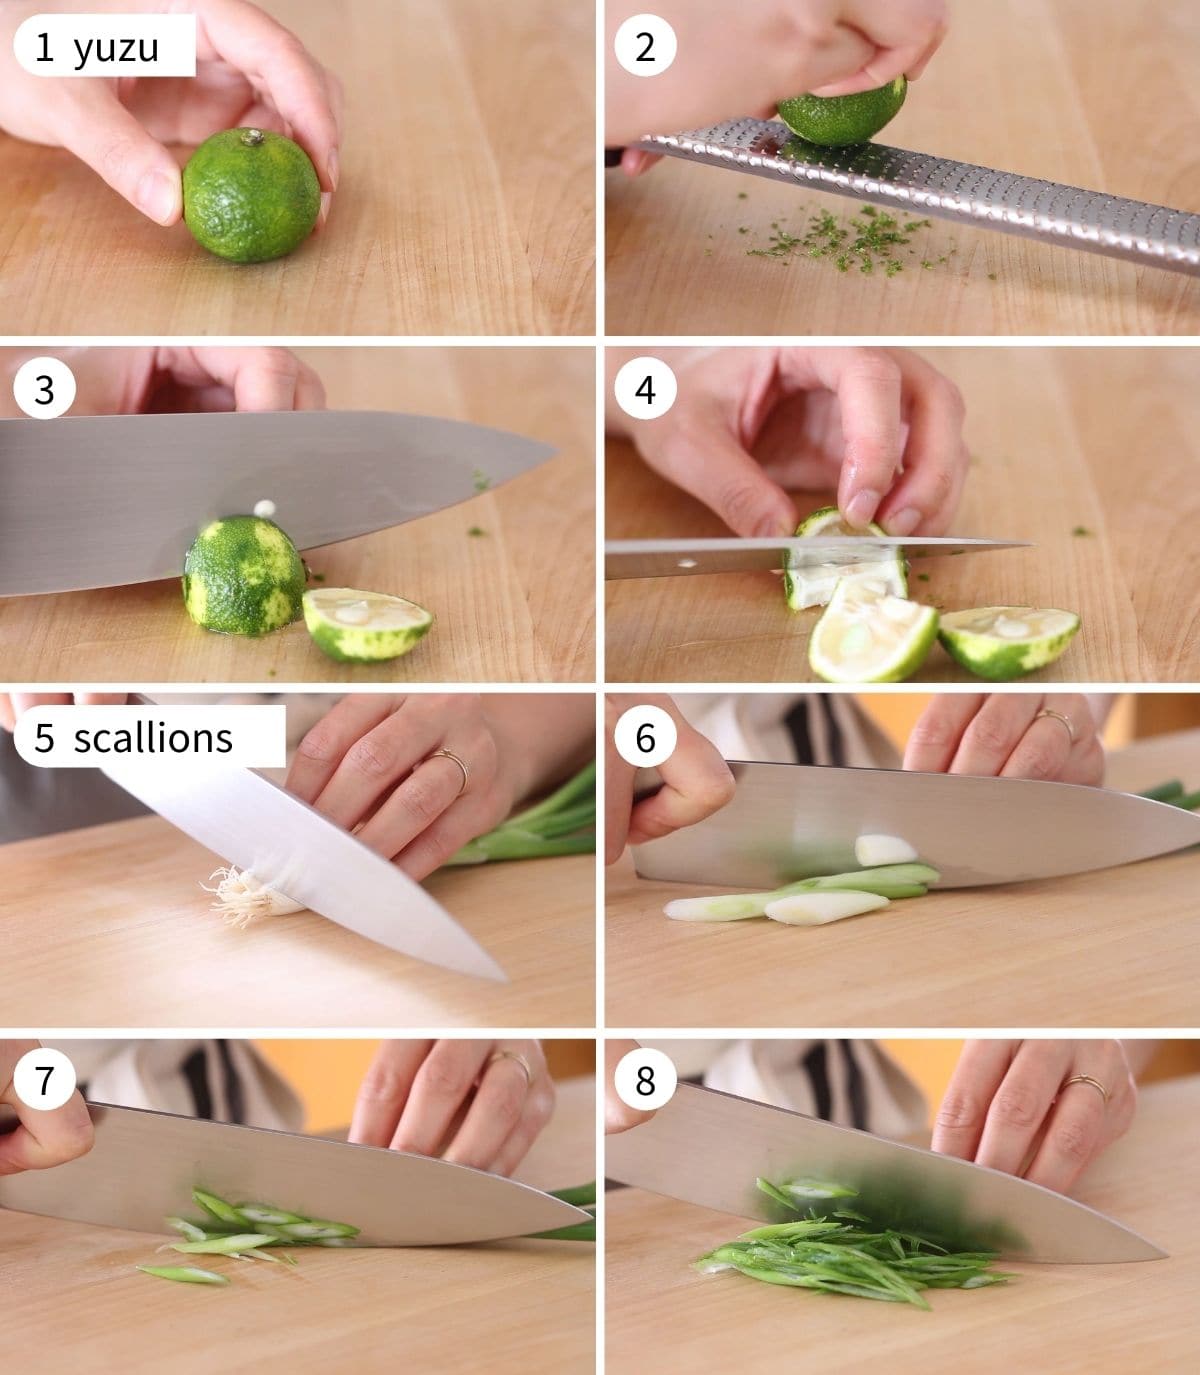 Step by step photos on how to zest and cut a fresh yuzu and how to cut the scallions.